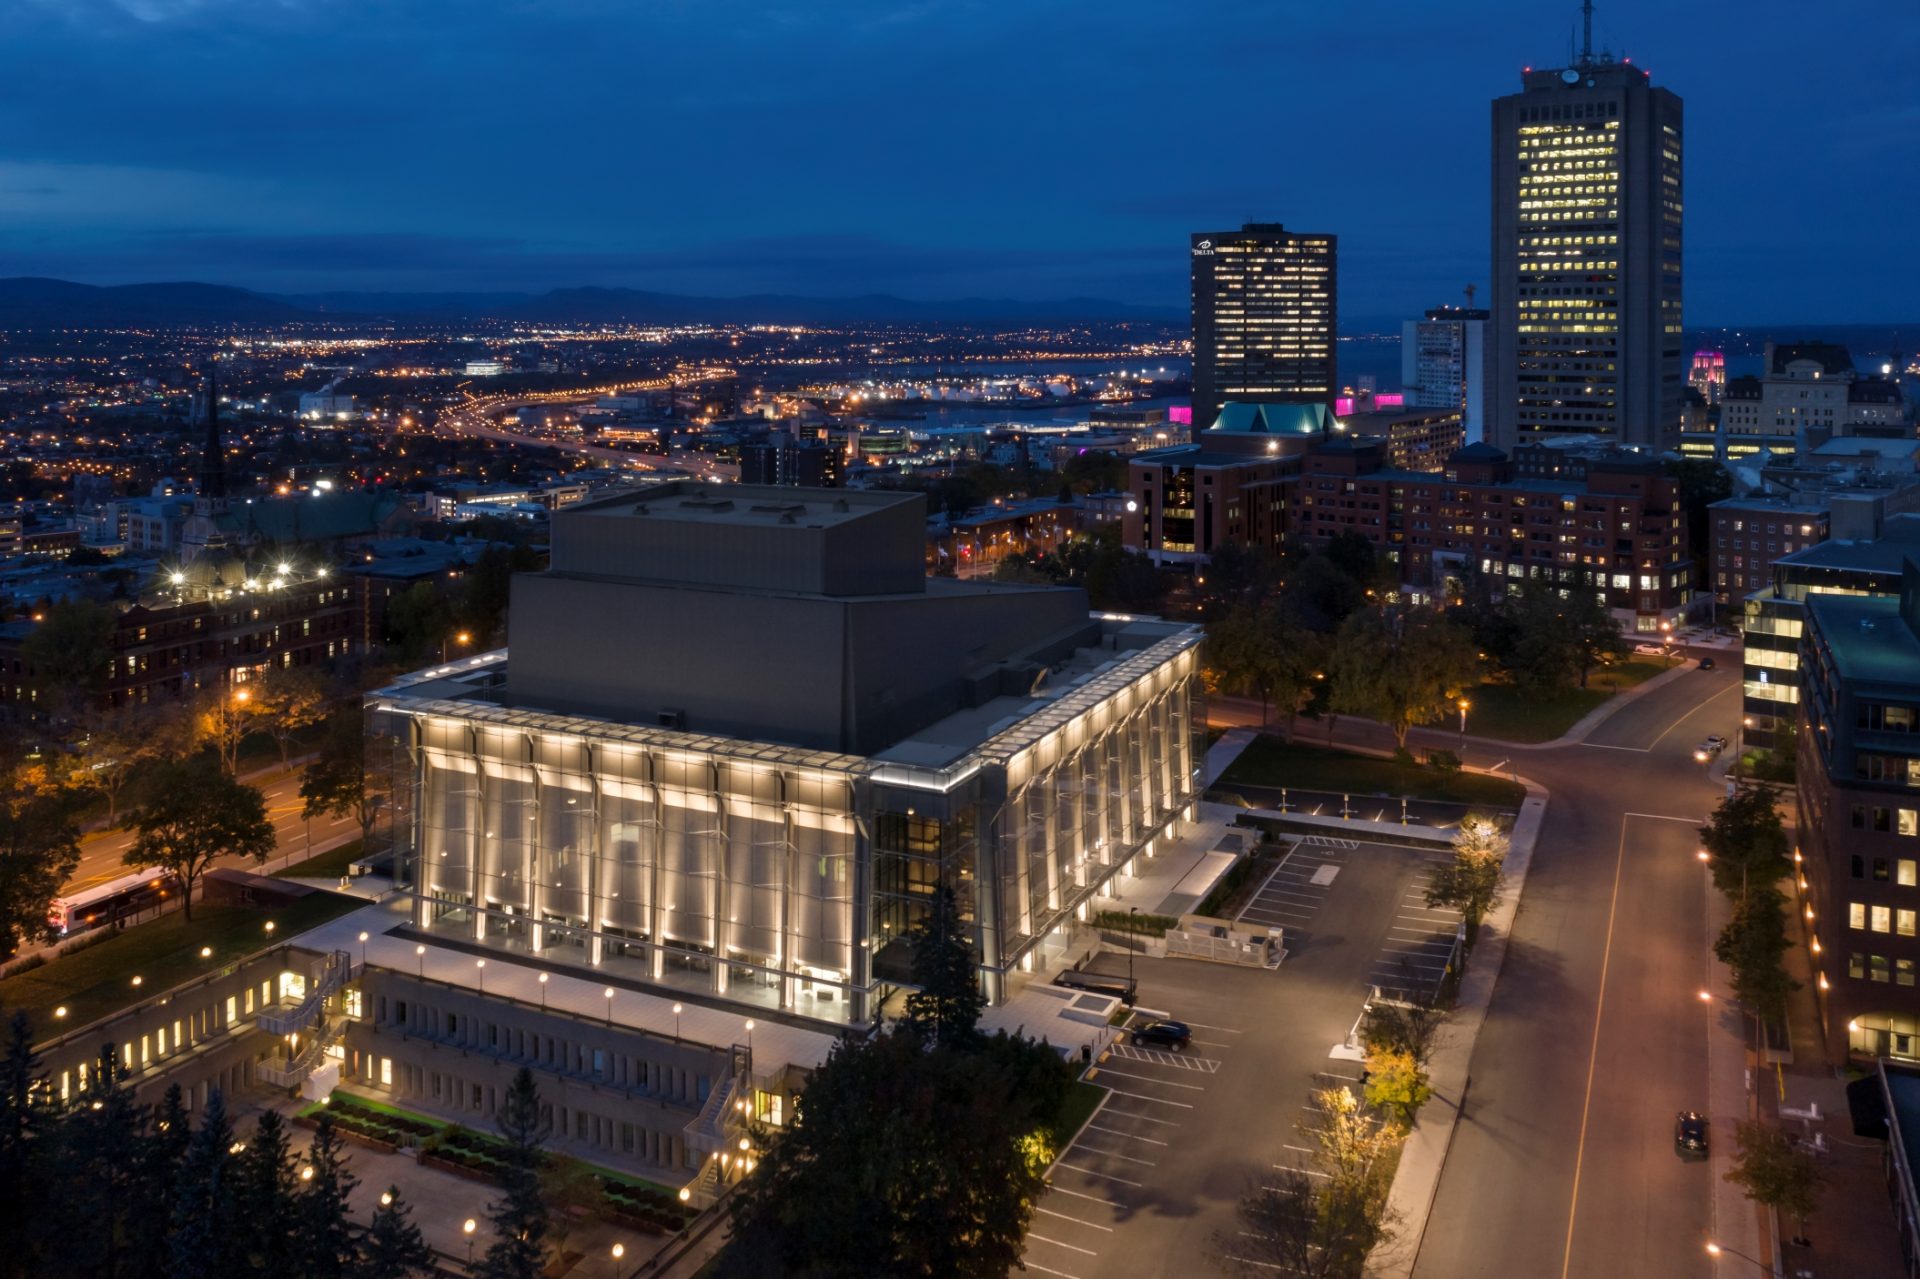 Grand-Theatre-Quebec-Lemay-Atelier-21-Architecture-Conservation-Credit StephaneGroleau-glass facade casing-night view-Drone-10